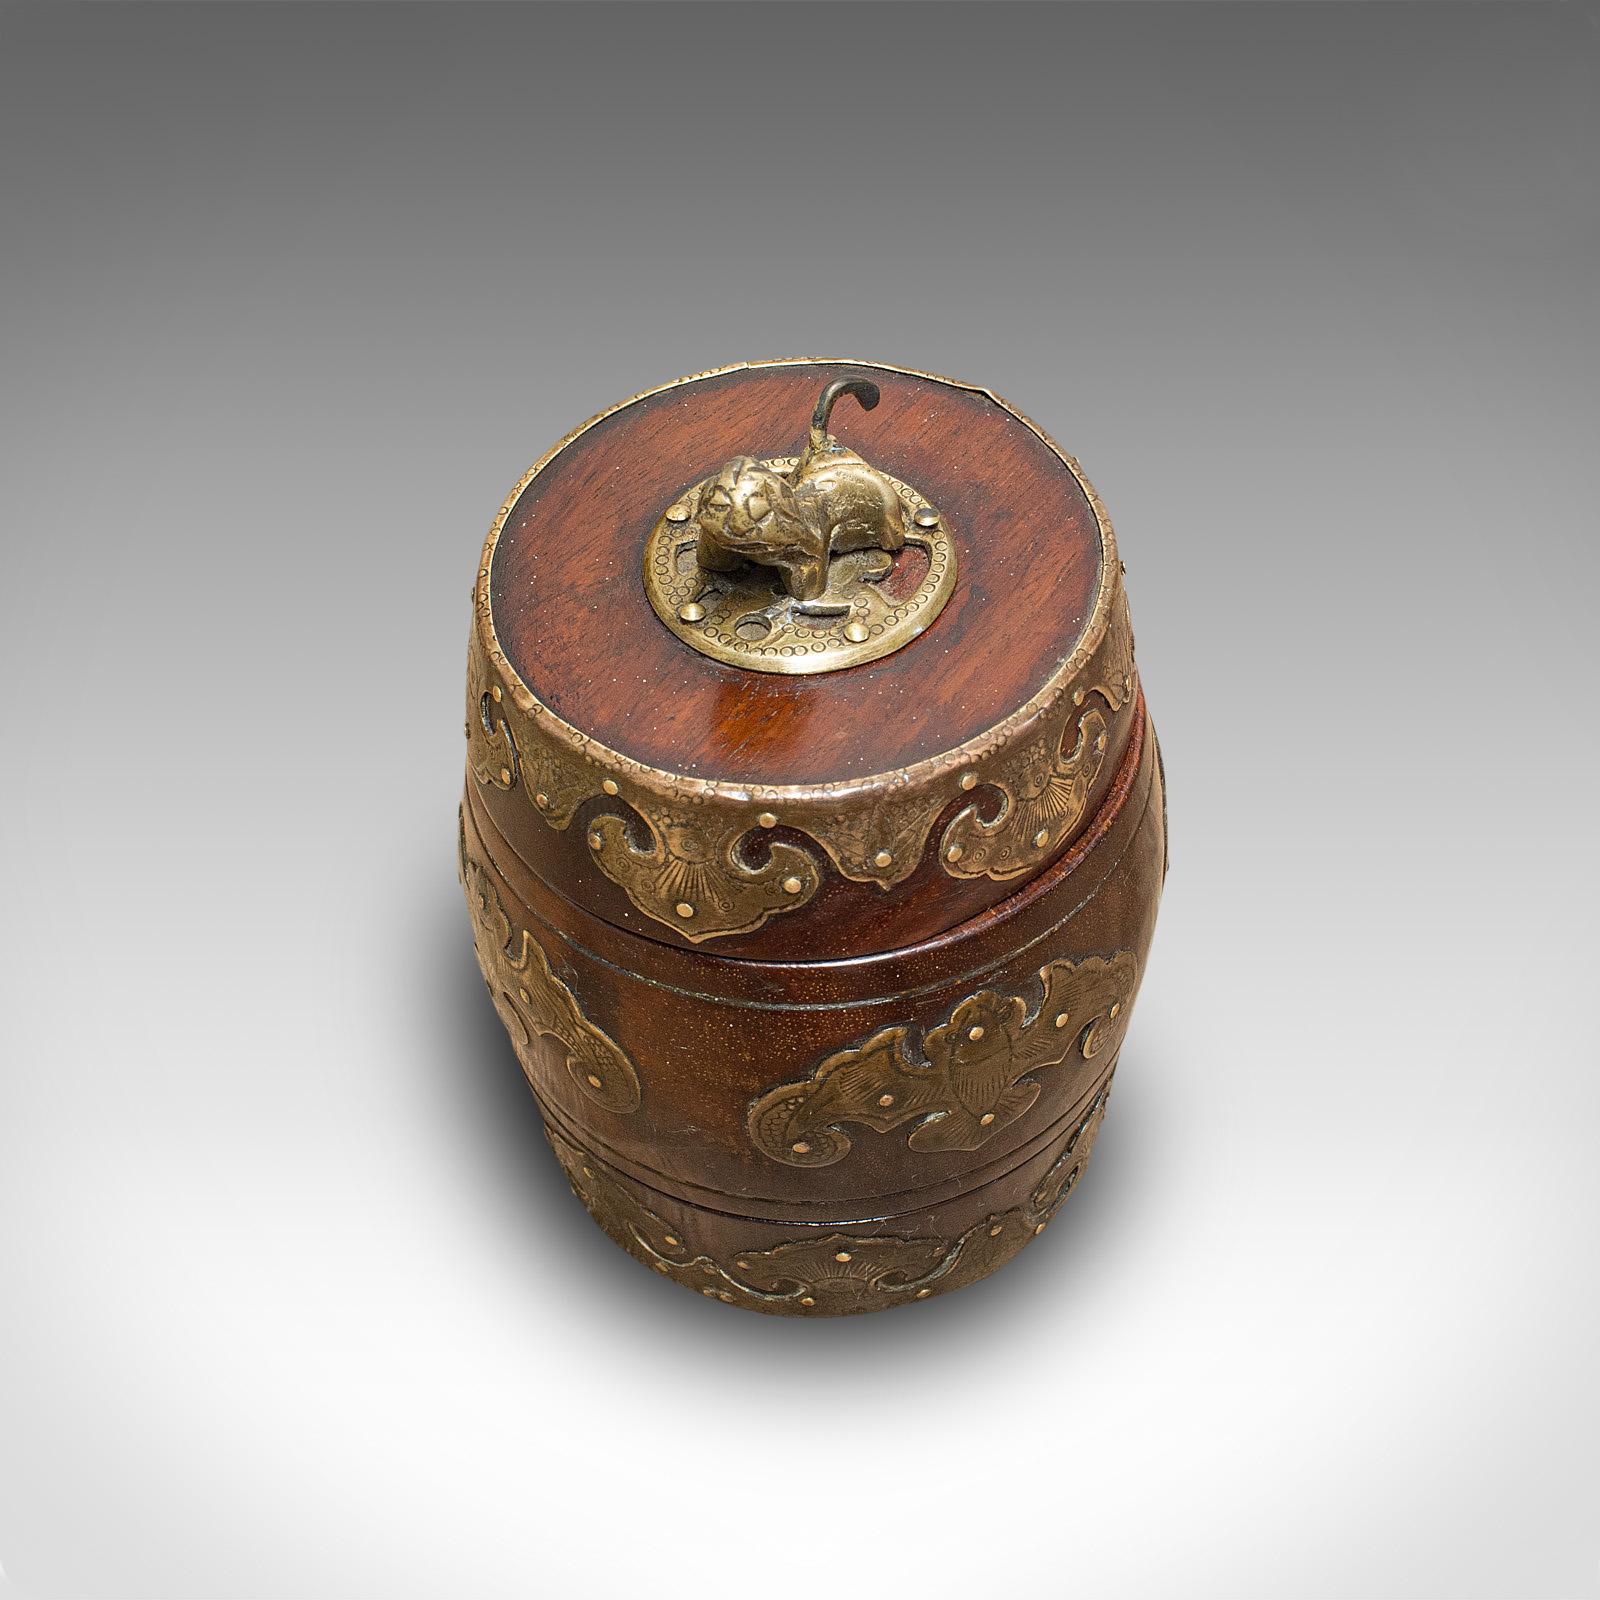 Small Antique Spice Jar, Chinese, Mahogany, Brass, Decorative Pot, Victorian For Sale 2